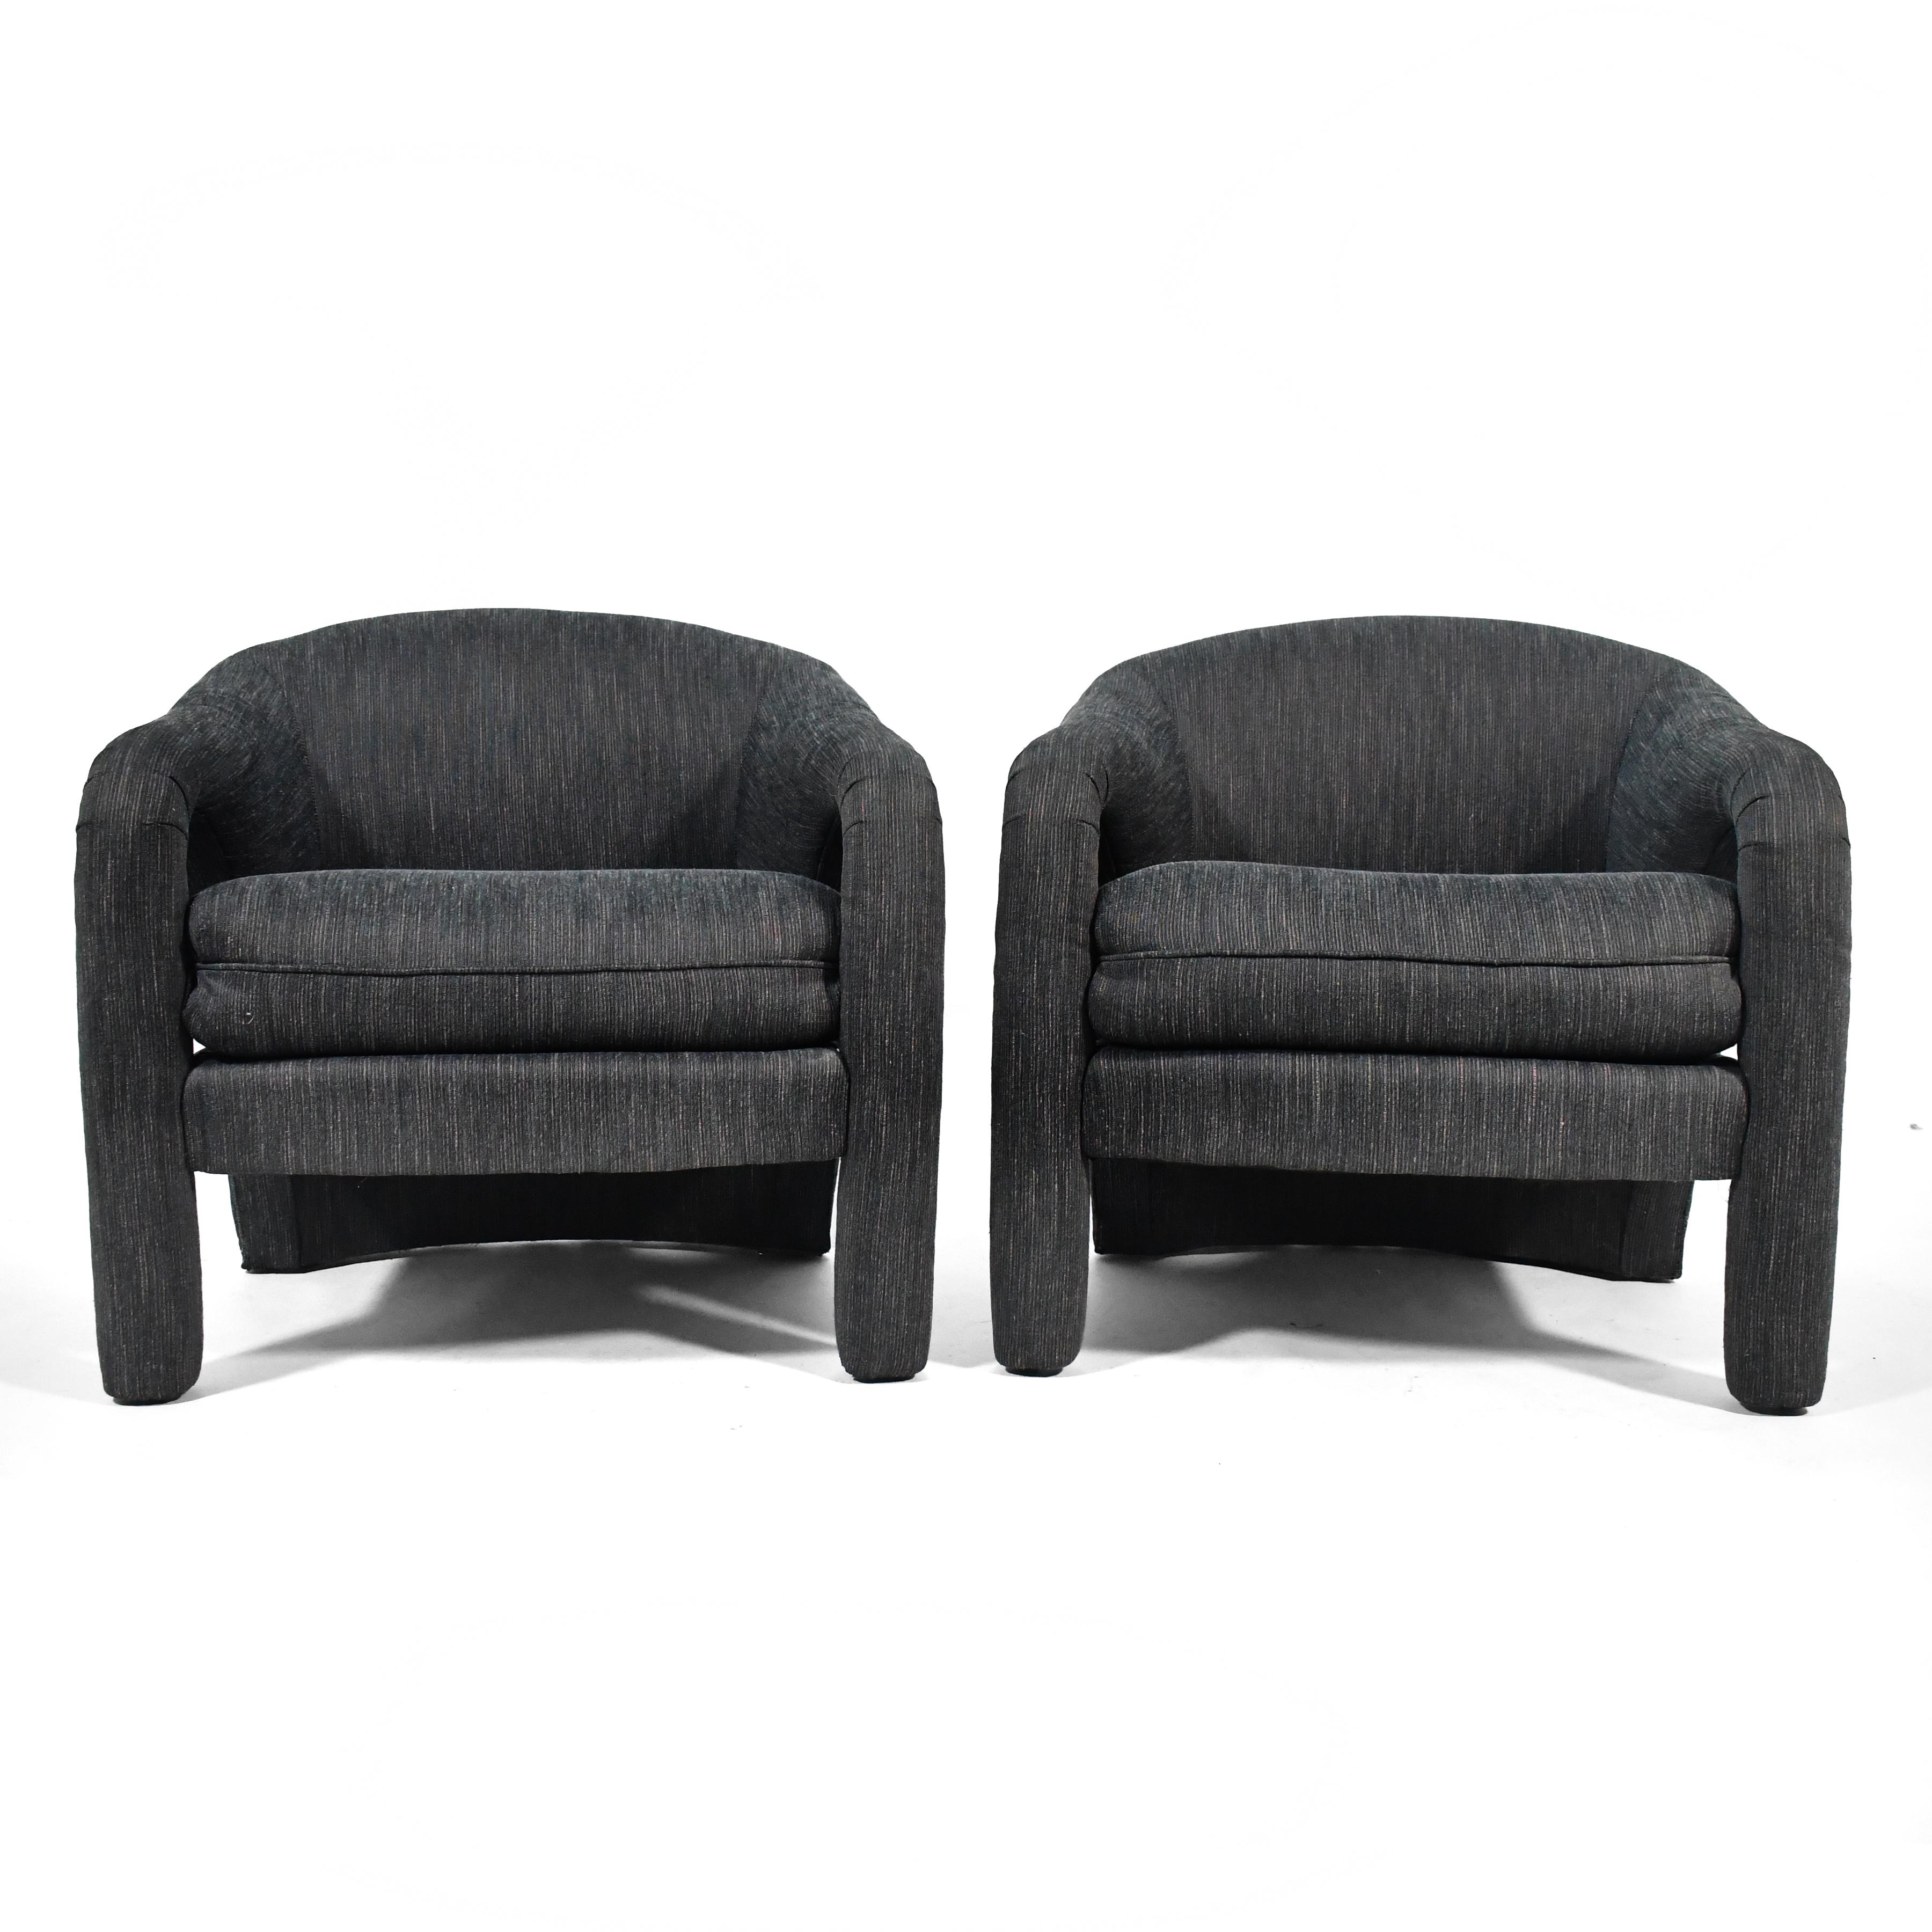 Post-Modern Pair of Elephant Chairs by Weiman For Sale